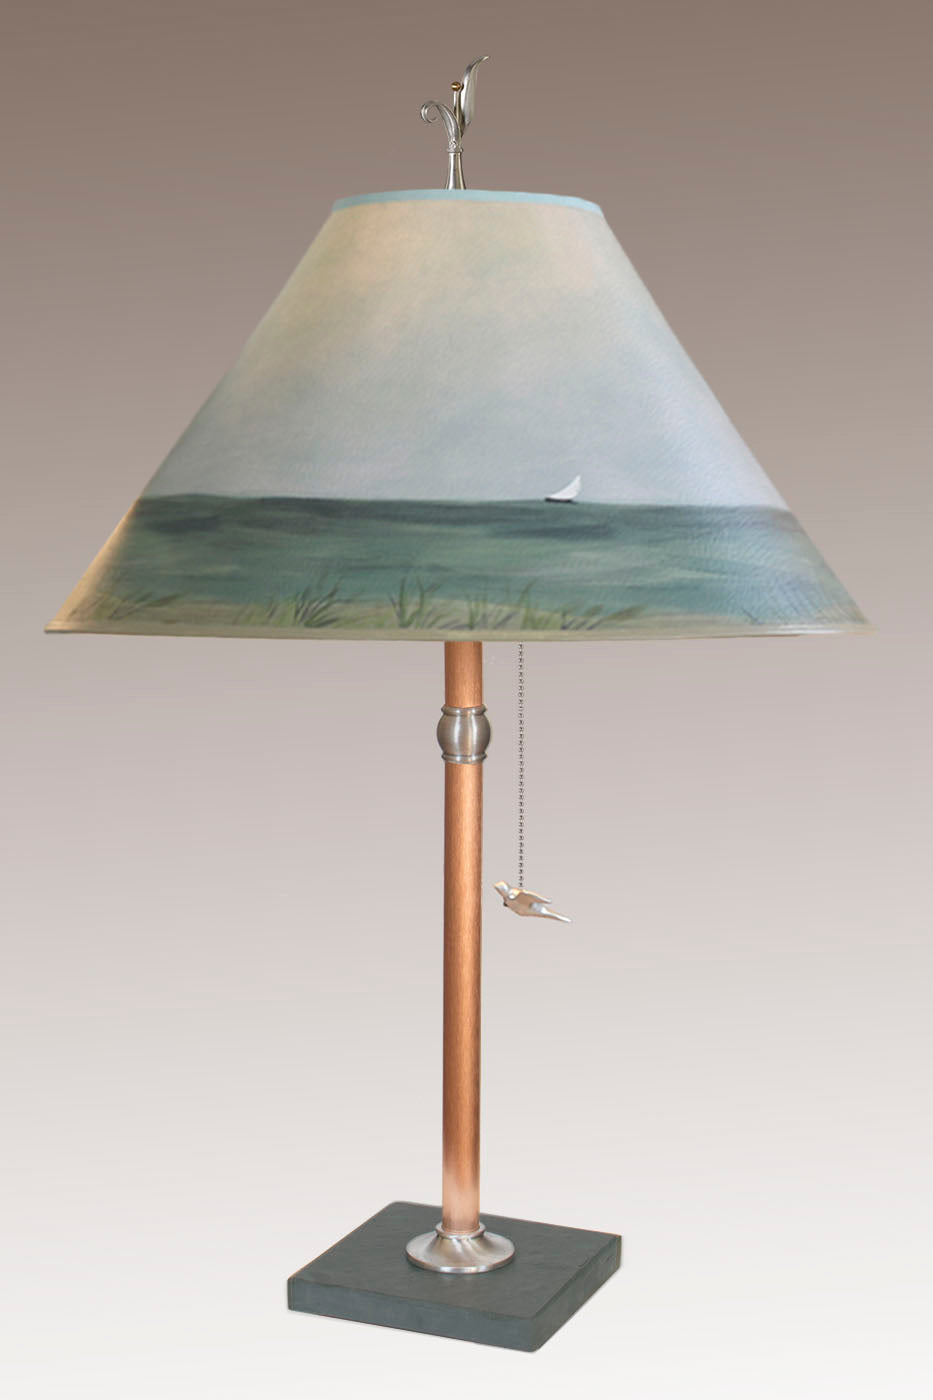 Copper Table Lamp with Large Conical Shade in Shore